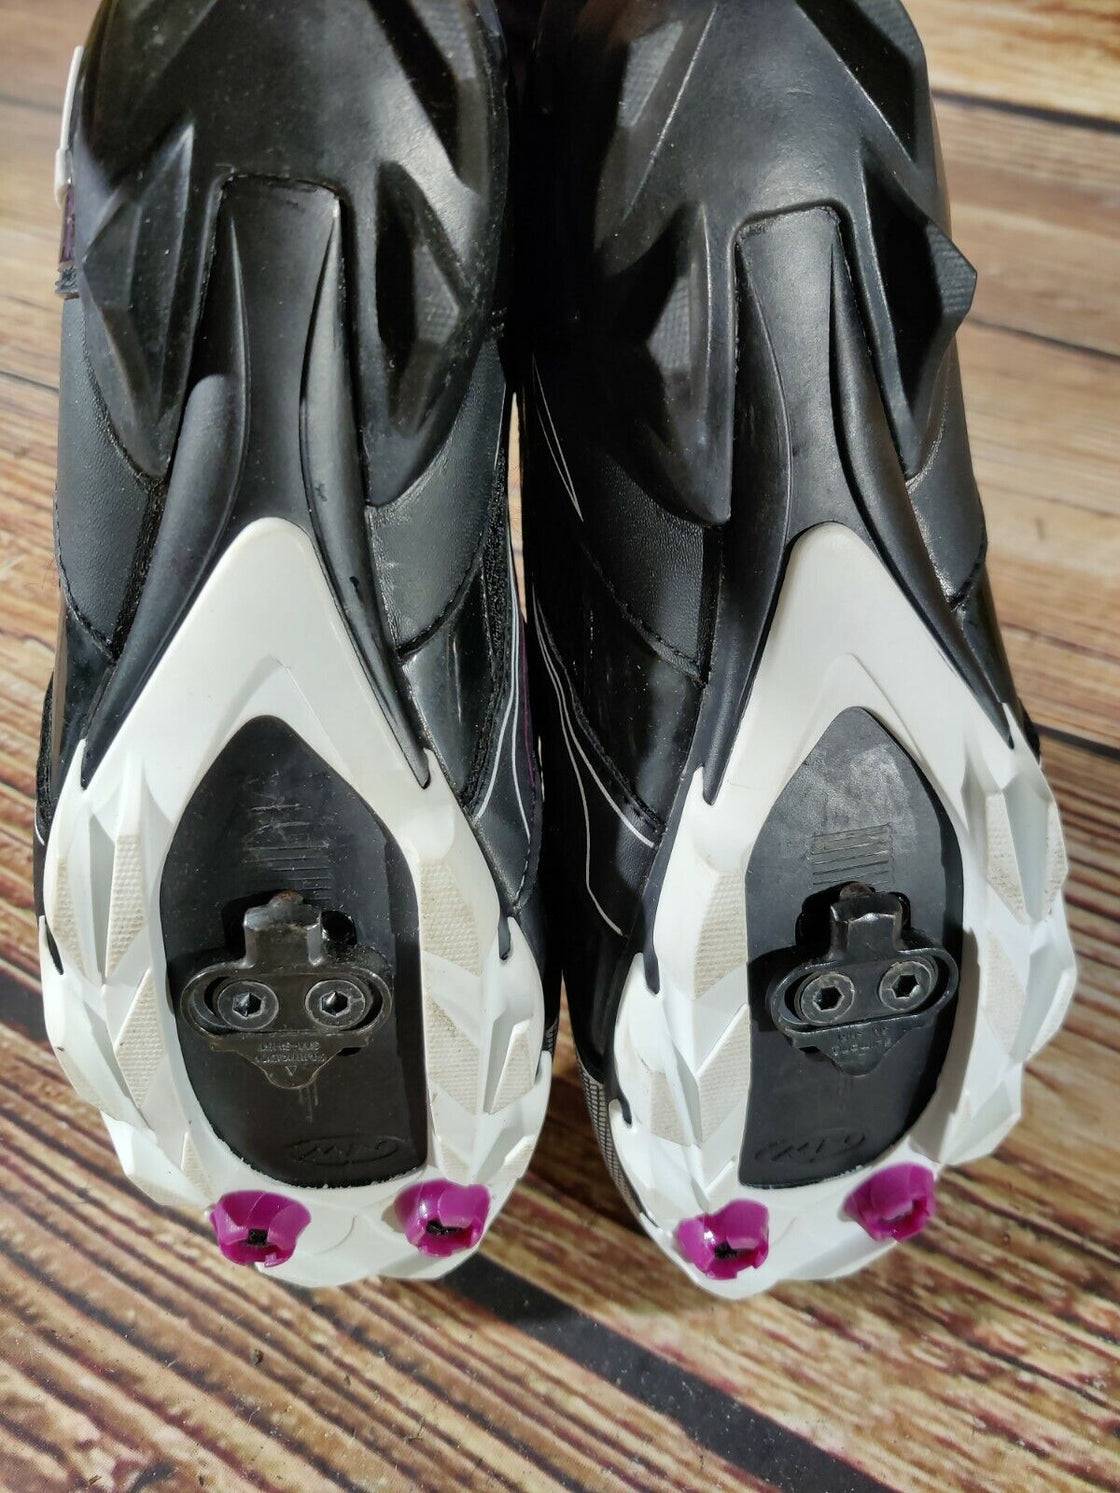 NORTHWAVE Angel Cycling MTB Shoes Mountain Bike Boots 2 Bolts Ladies EU38, US6.5